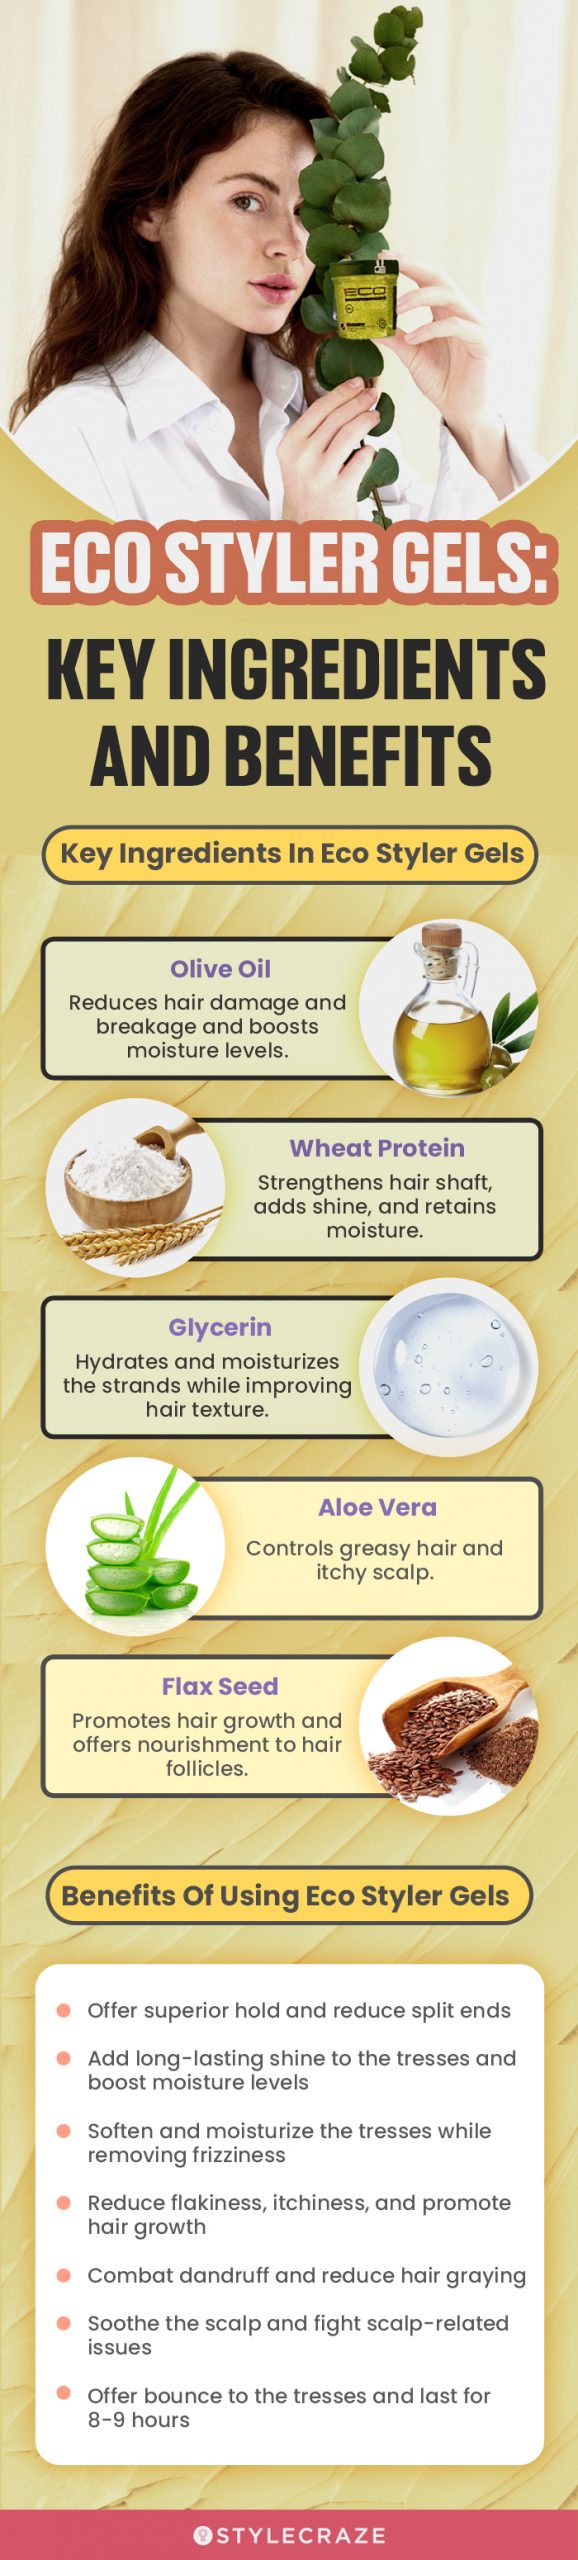 Eco Styler Gels: Key Ingredients And Benefits [infographic]